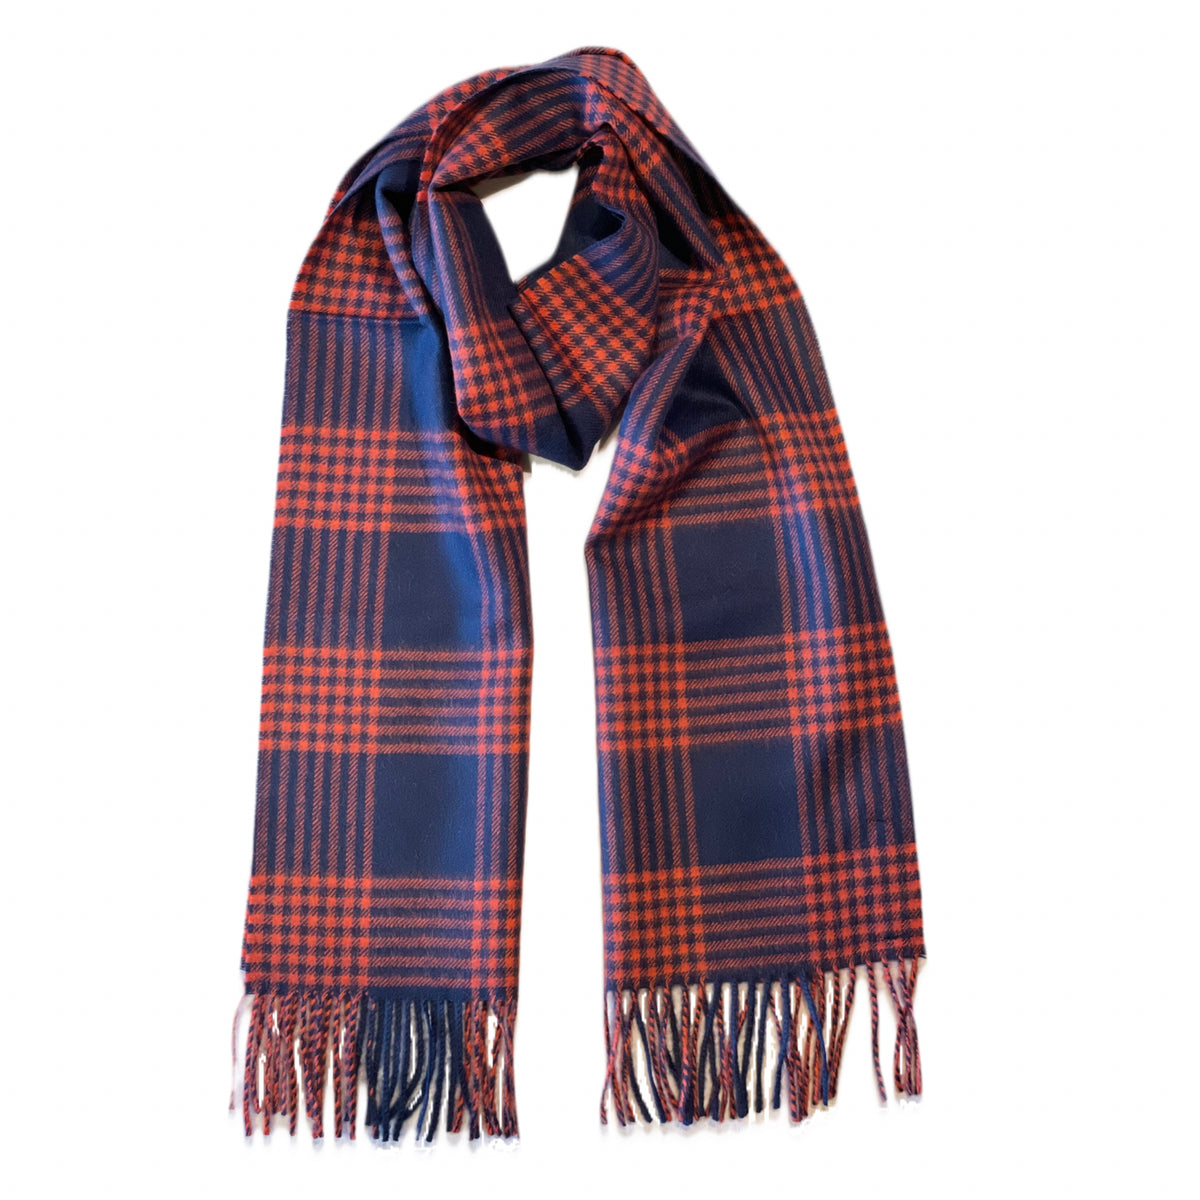 A product photo against a white background of an Alpacas of Montana soft stylish men&#39;s fashion comfortable cozy warm alpaca wool orange red and navy blue plaid pattern scarf with tassels.